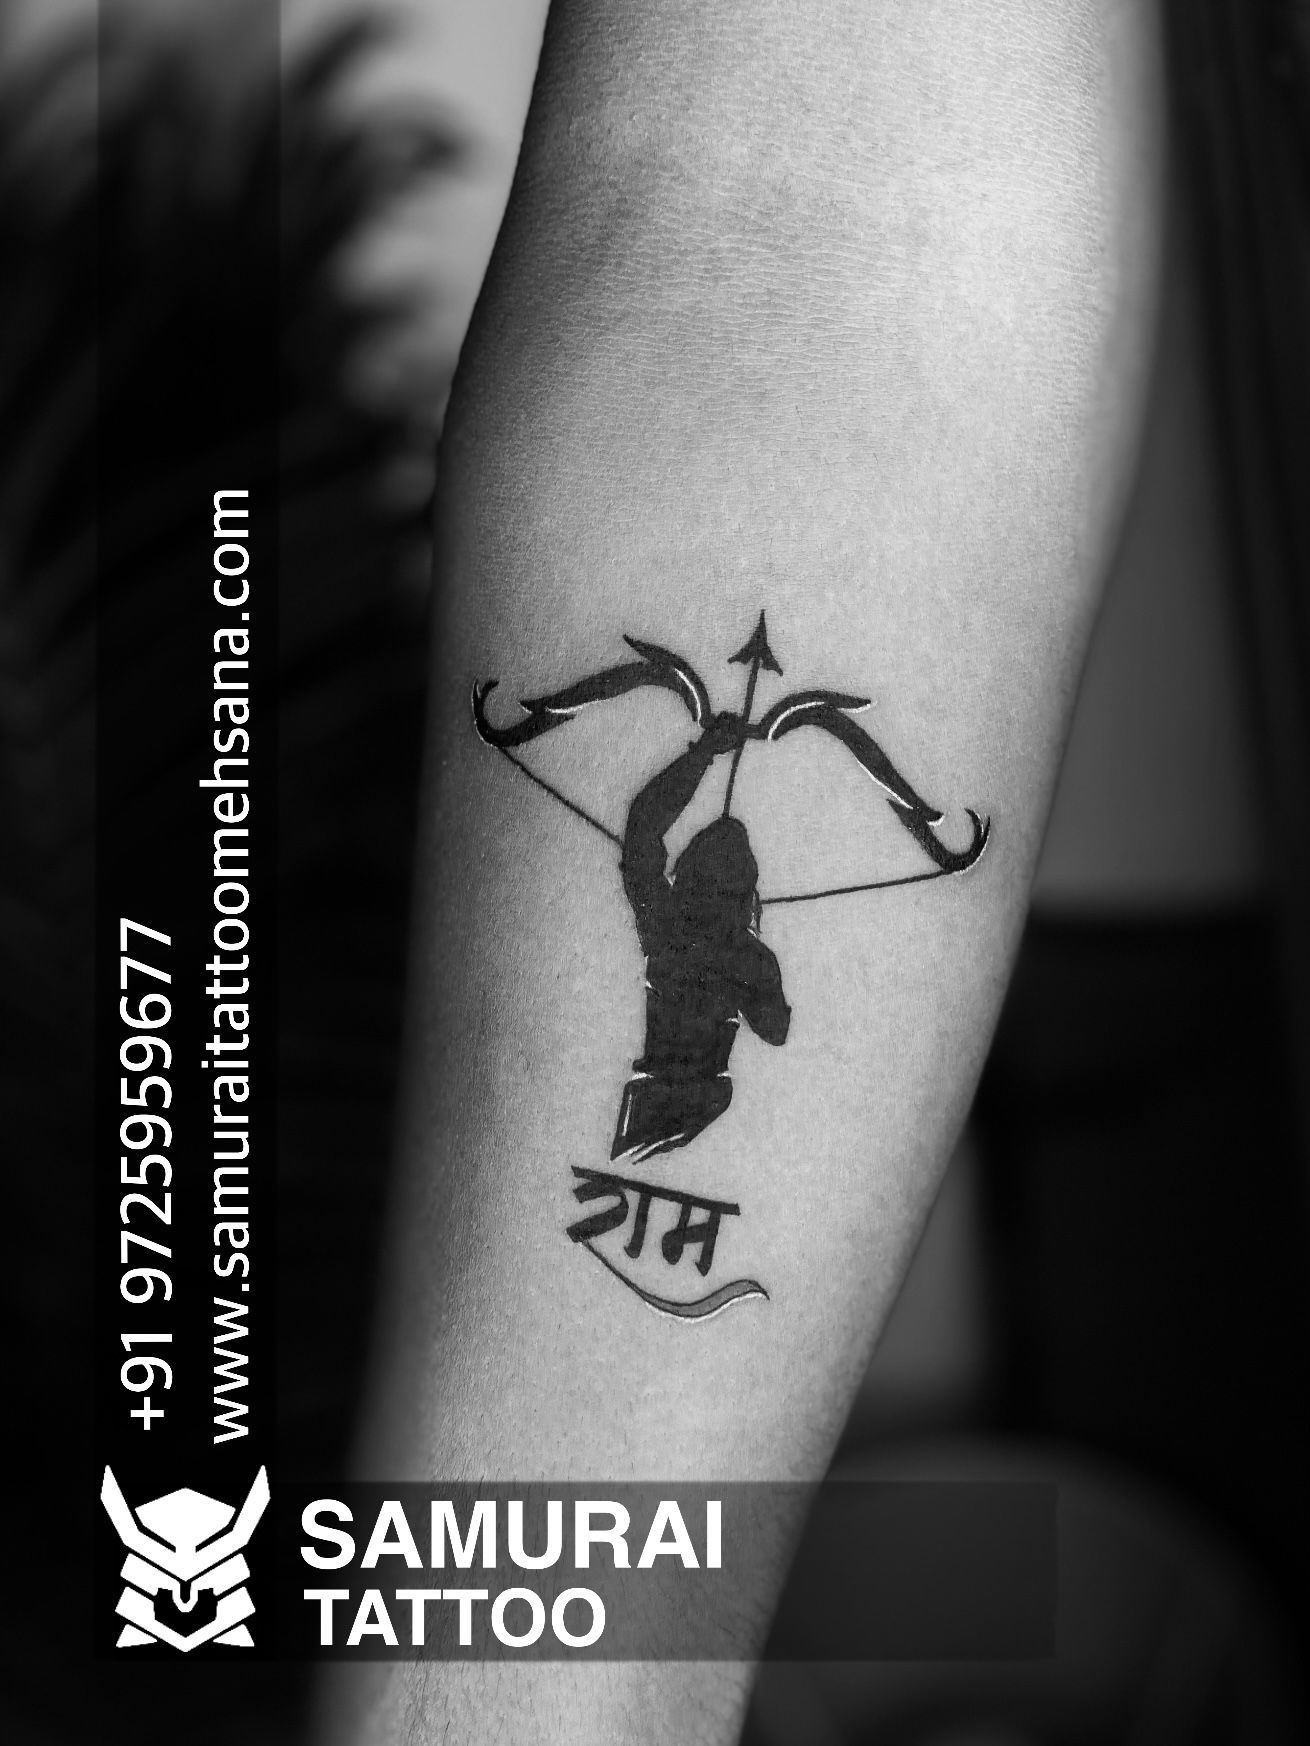 Name Design Tattoo at Rs 200/inch in Ahmedabad | ID: 2850671089591